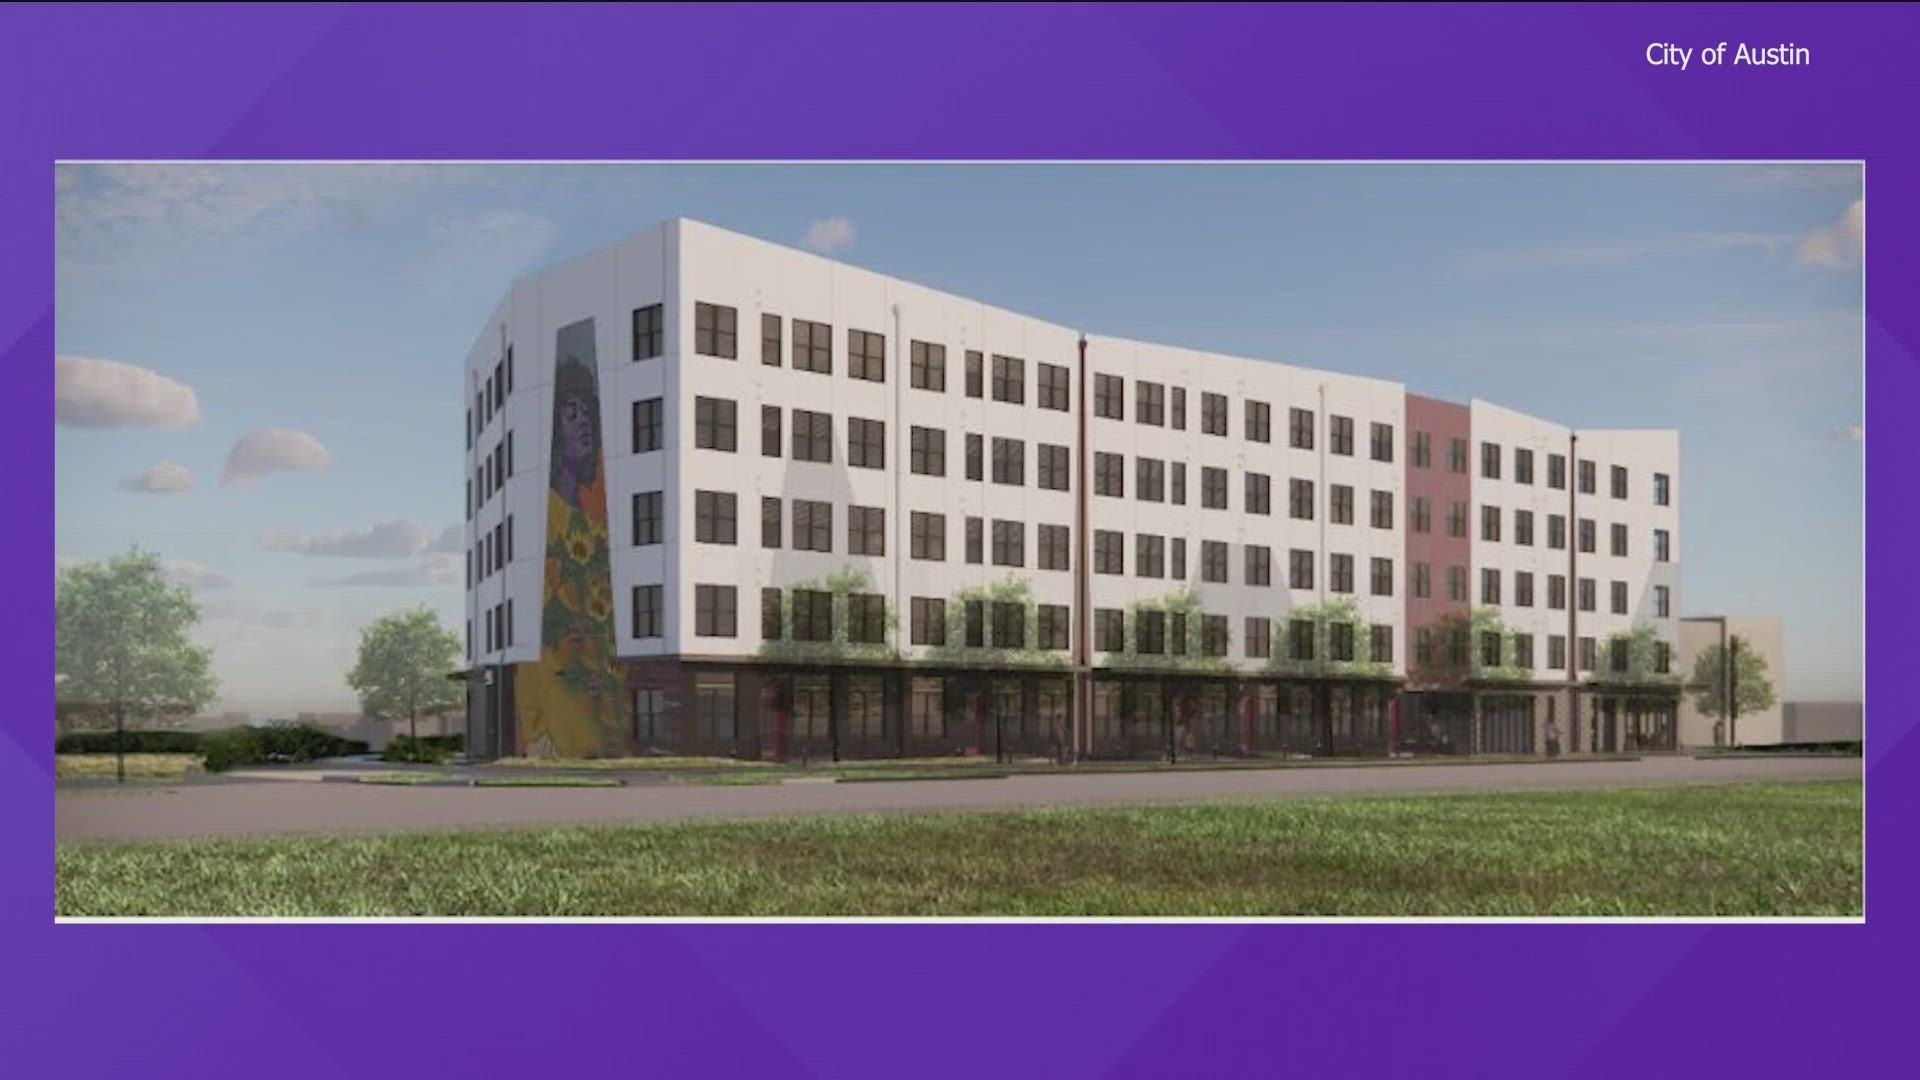 Leaders in Austin are working to bring more affordable housing to the city. A new development is in the works in East Austin.